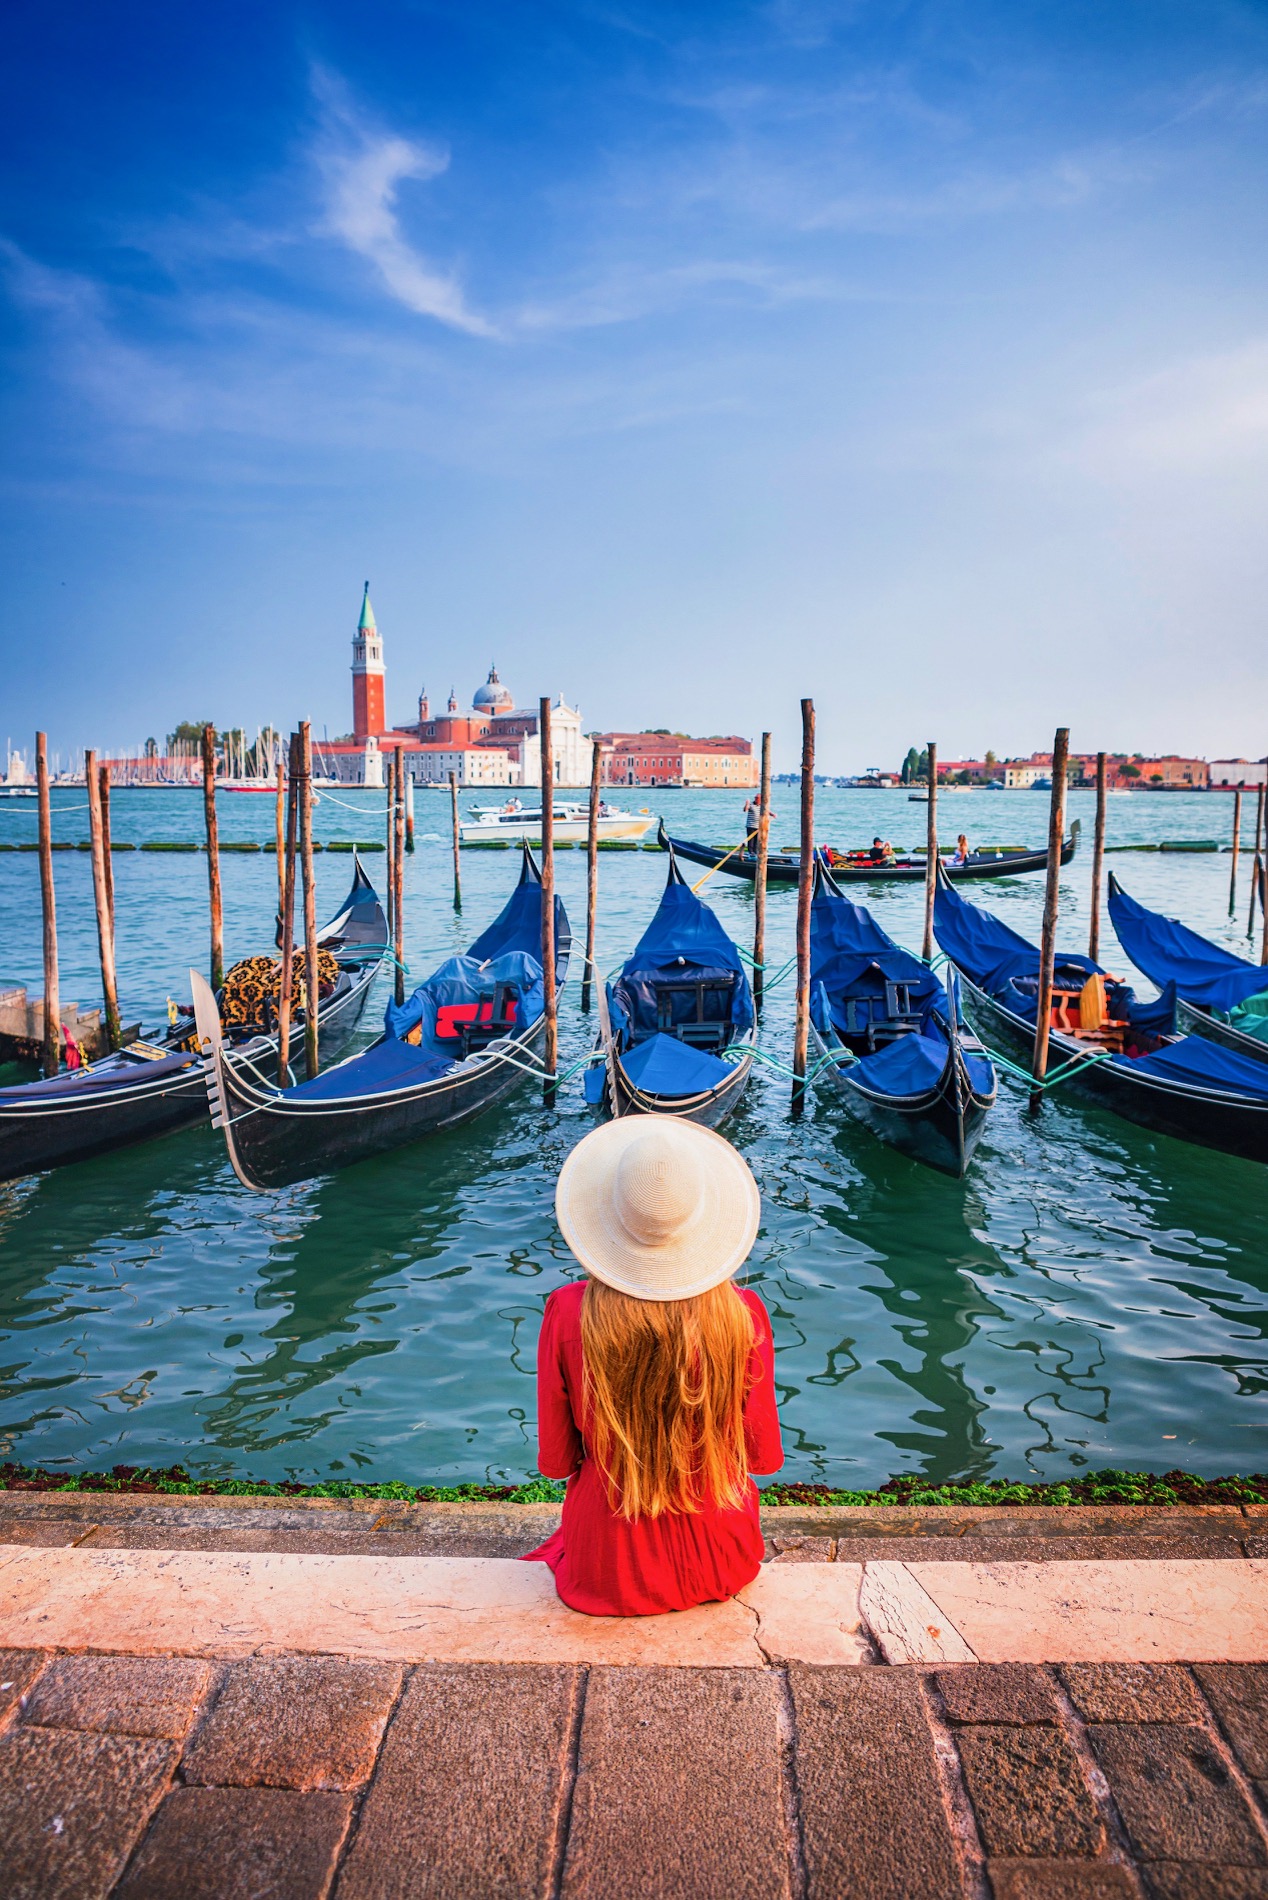 a Girl in reddress sitting on the grand canal with gondolas in front of her